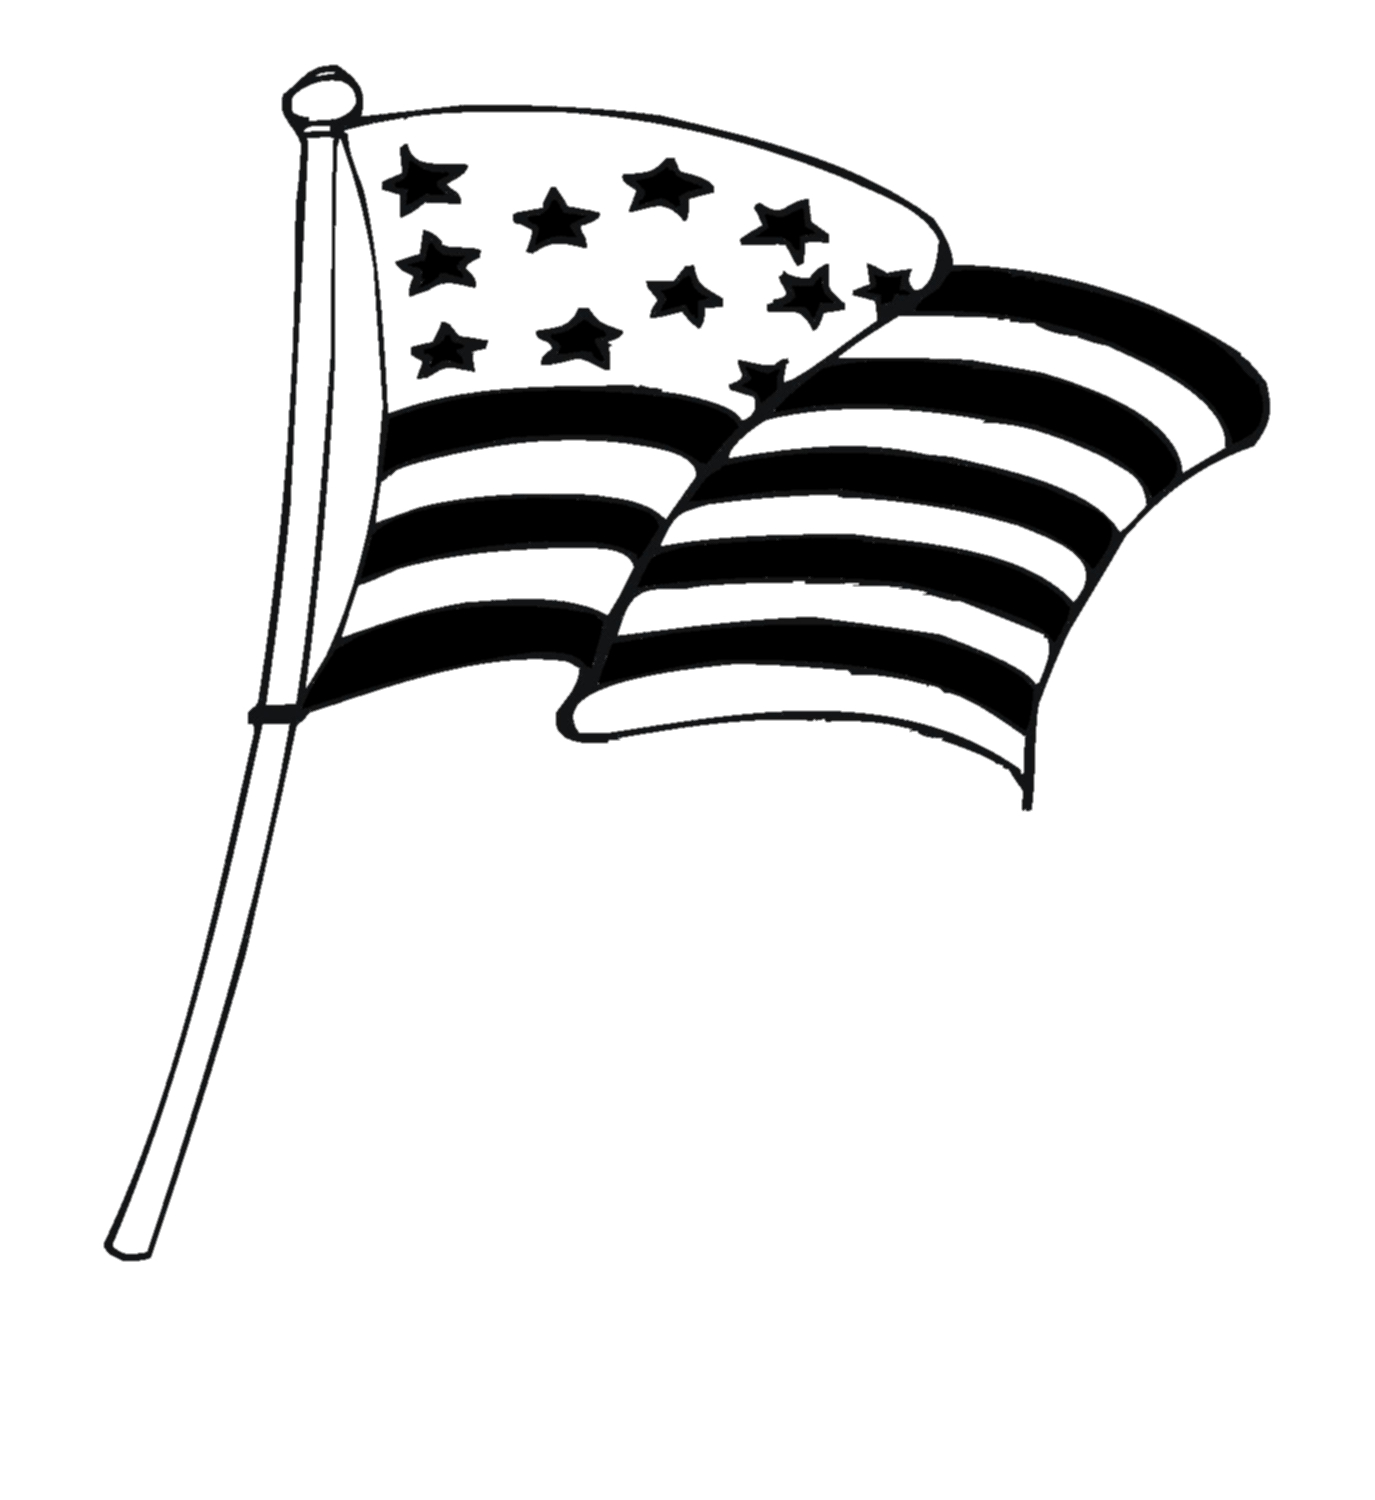 American flag clip art waving clipart cliparts for you